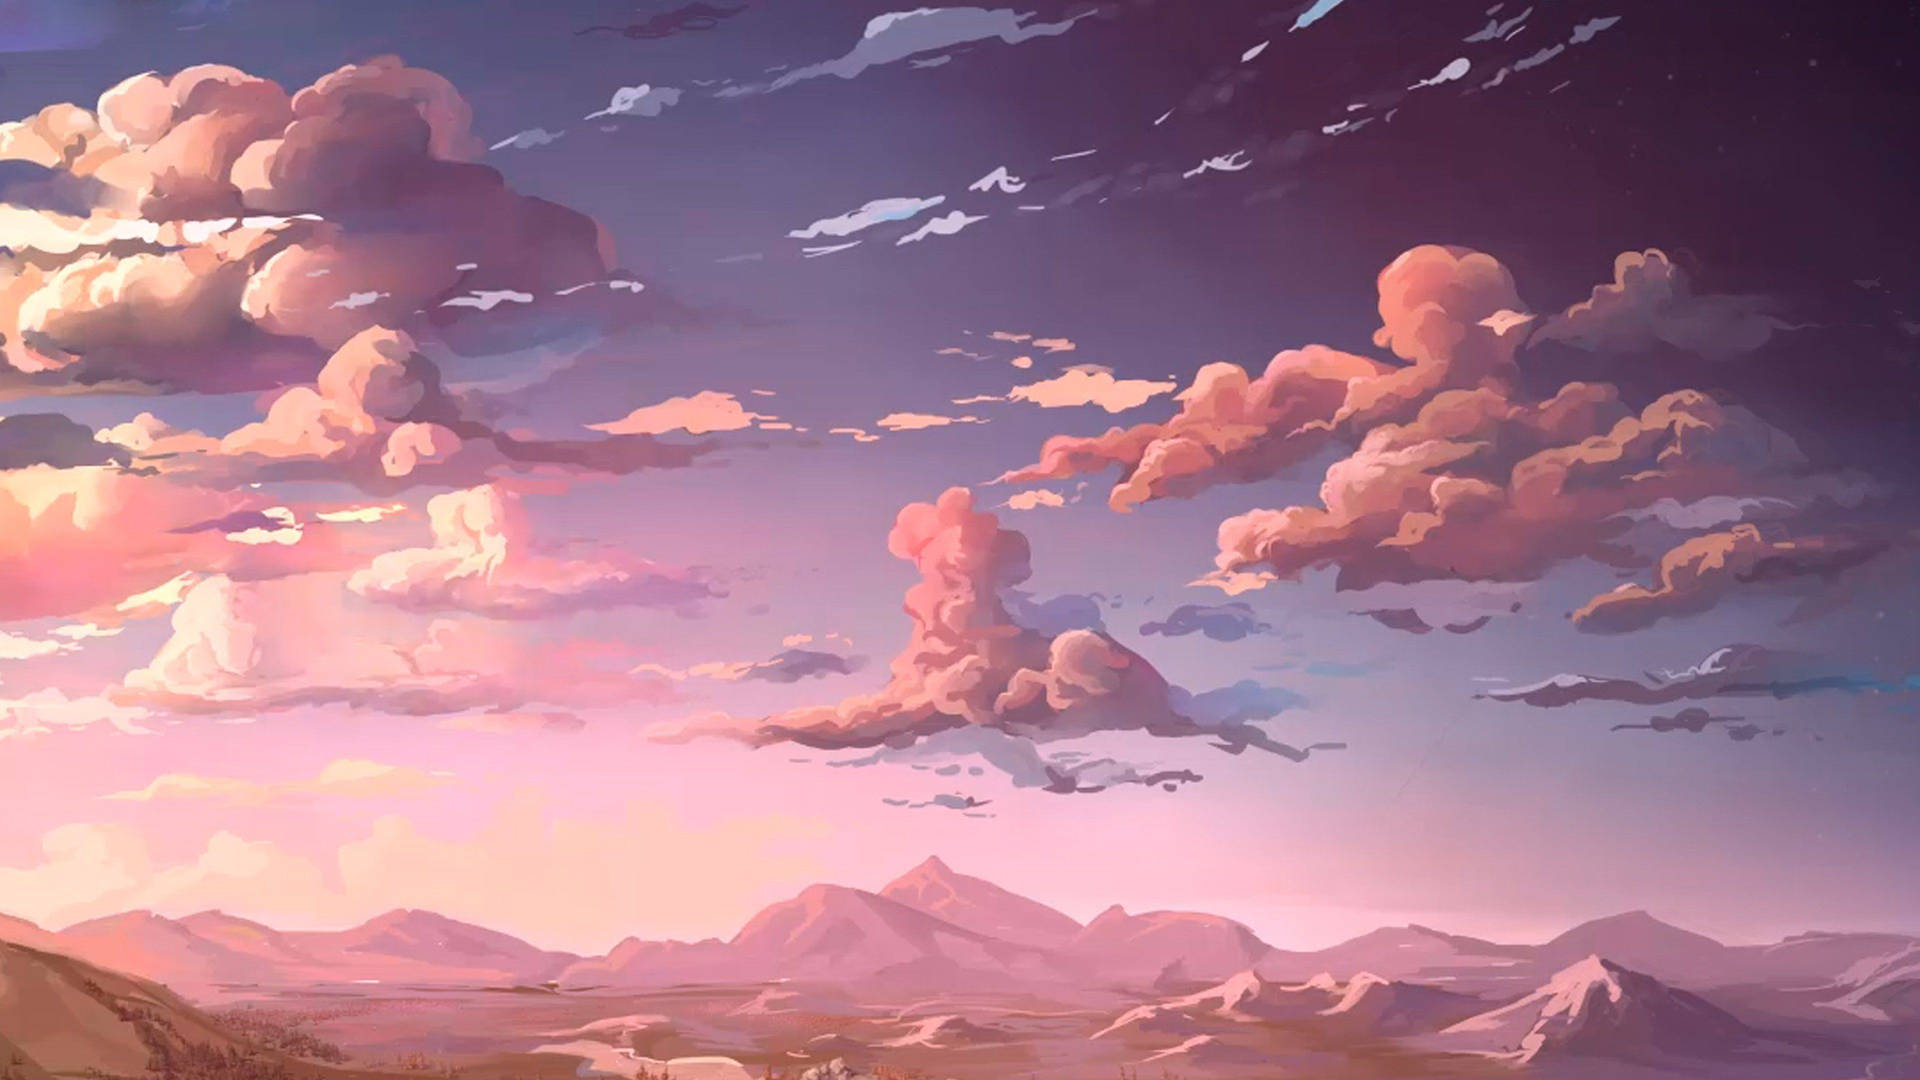 Anime Clouds And Mountains Aesthetic Mac Picture